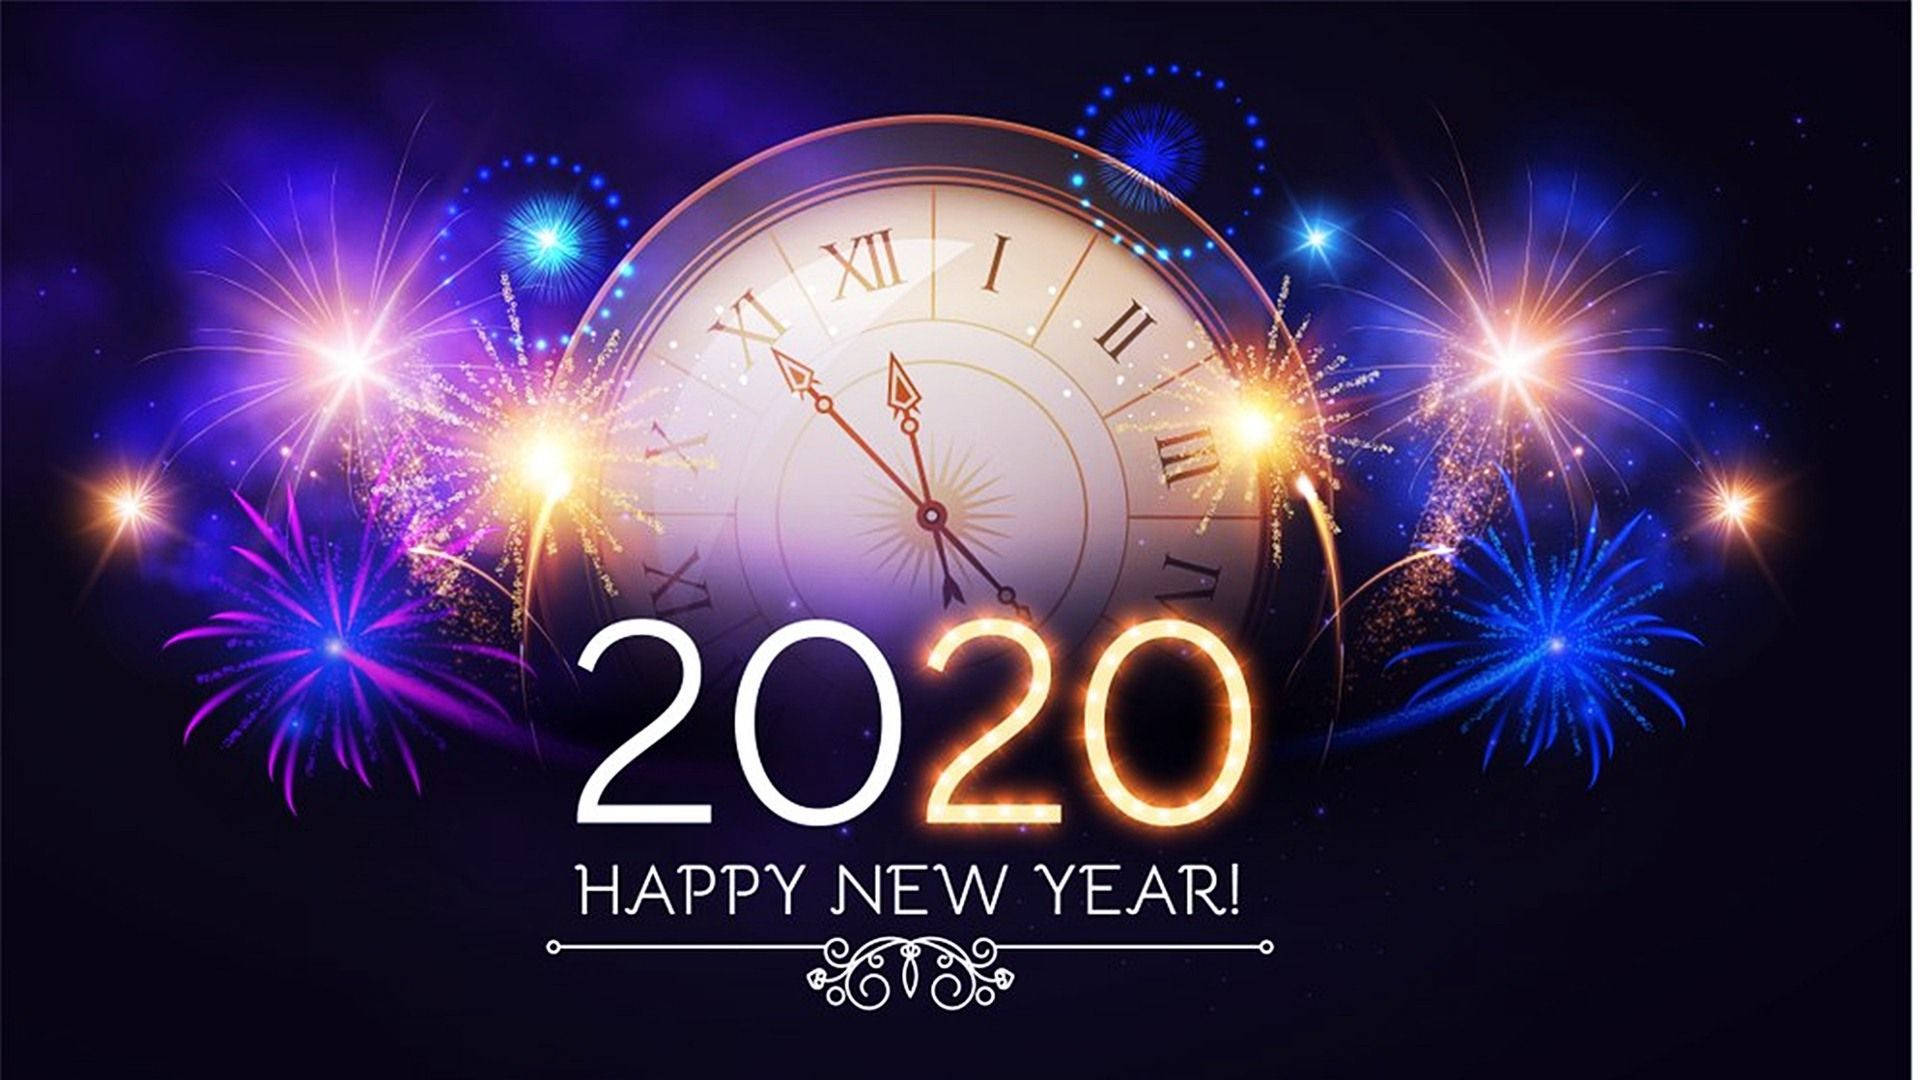 Wishing You a Very Happy New Year 2020 Wallpaper